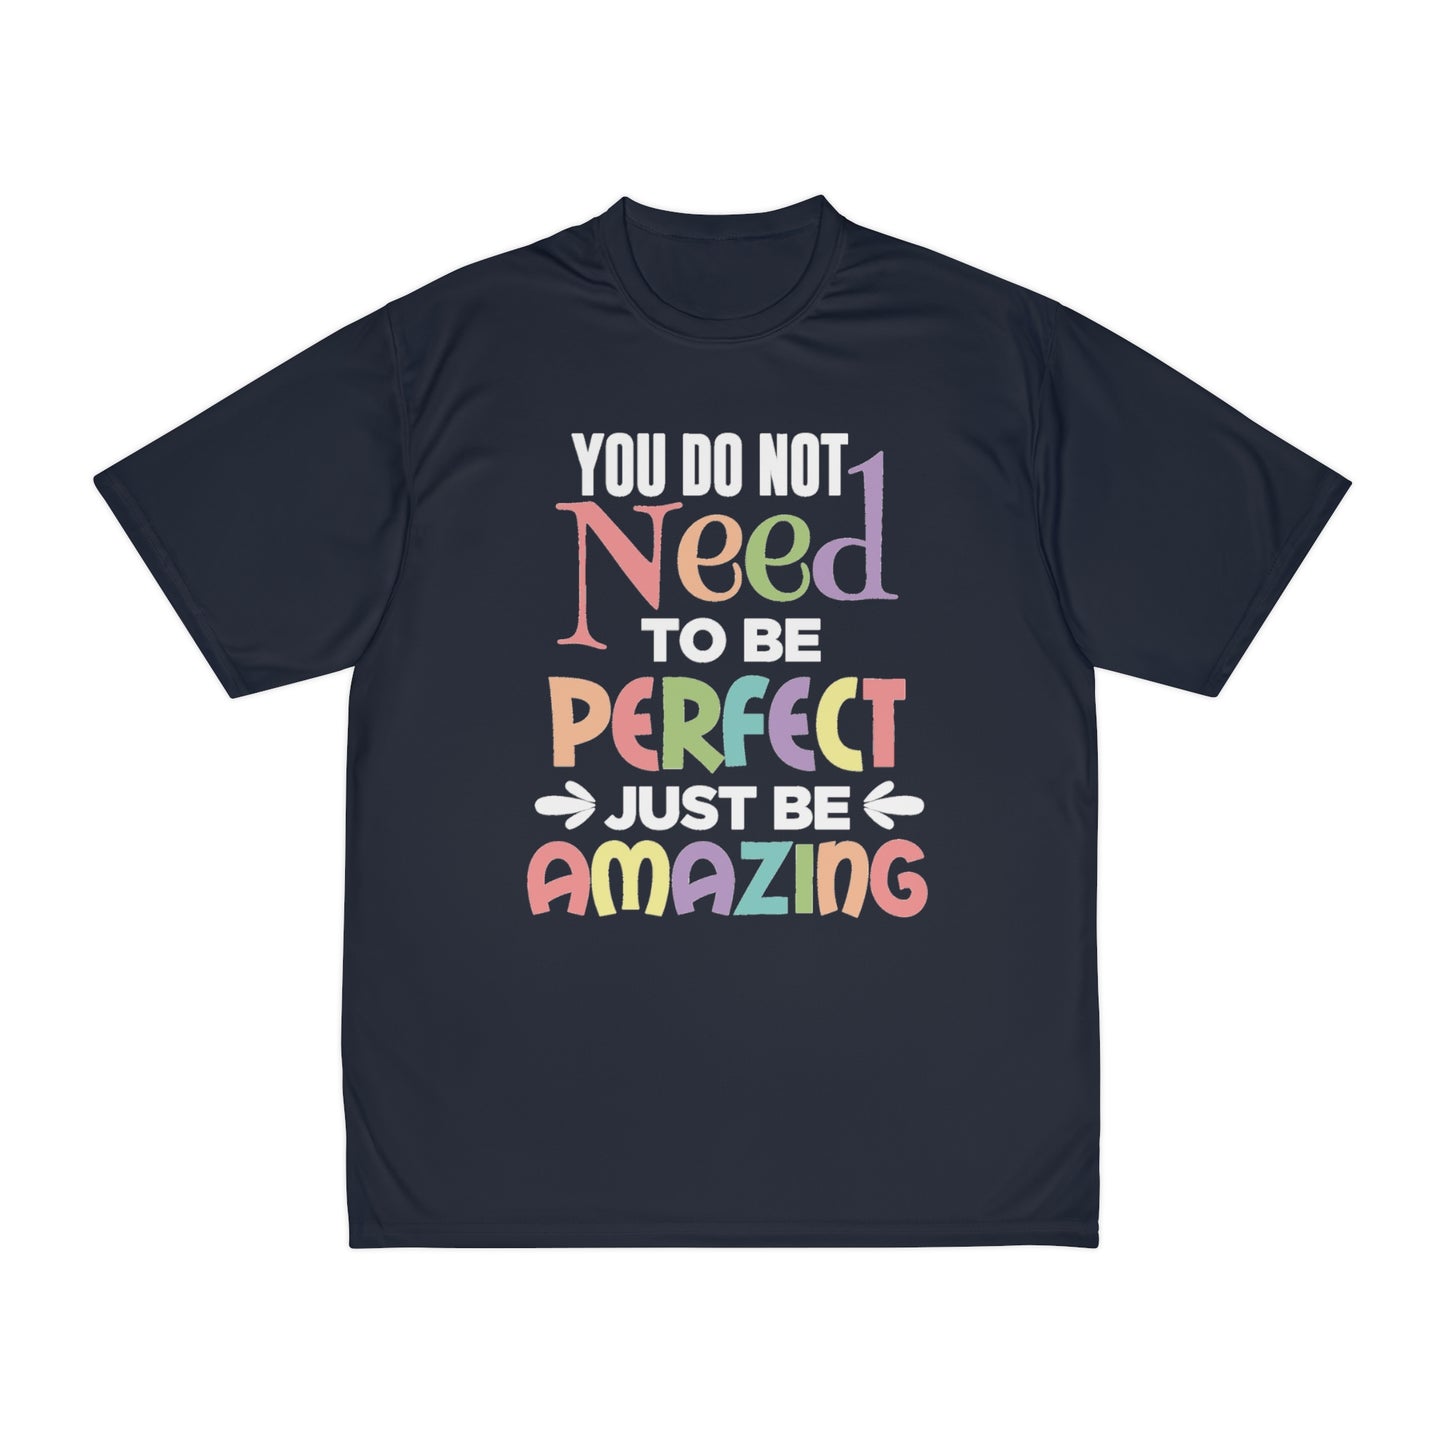 You Do Not Need To Be Perfect Just Be Amazing Men's T-Shirt, Amazing shirts, Inspirational shirts, Motivational Shirts, Trendy tees